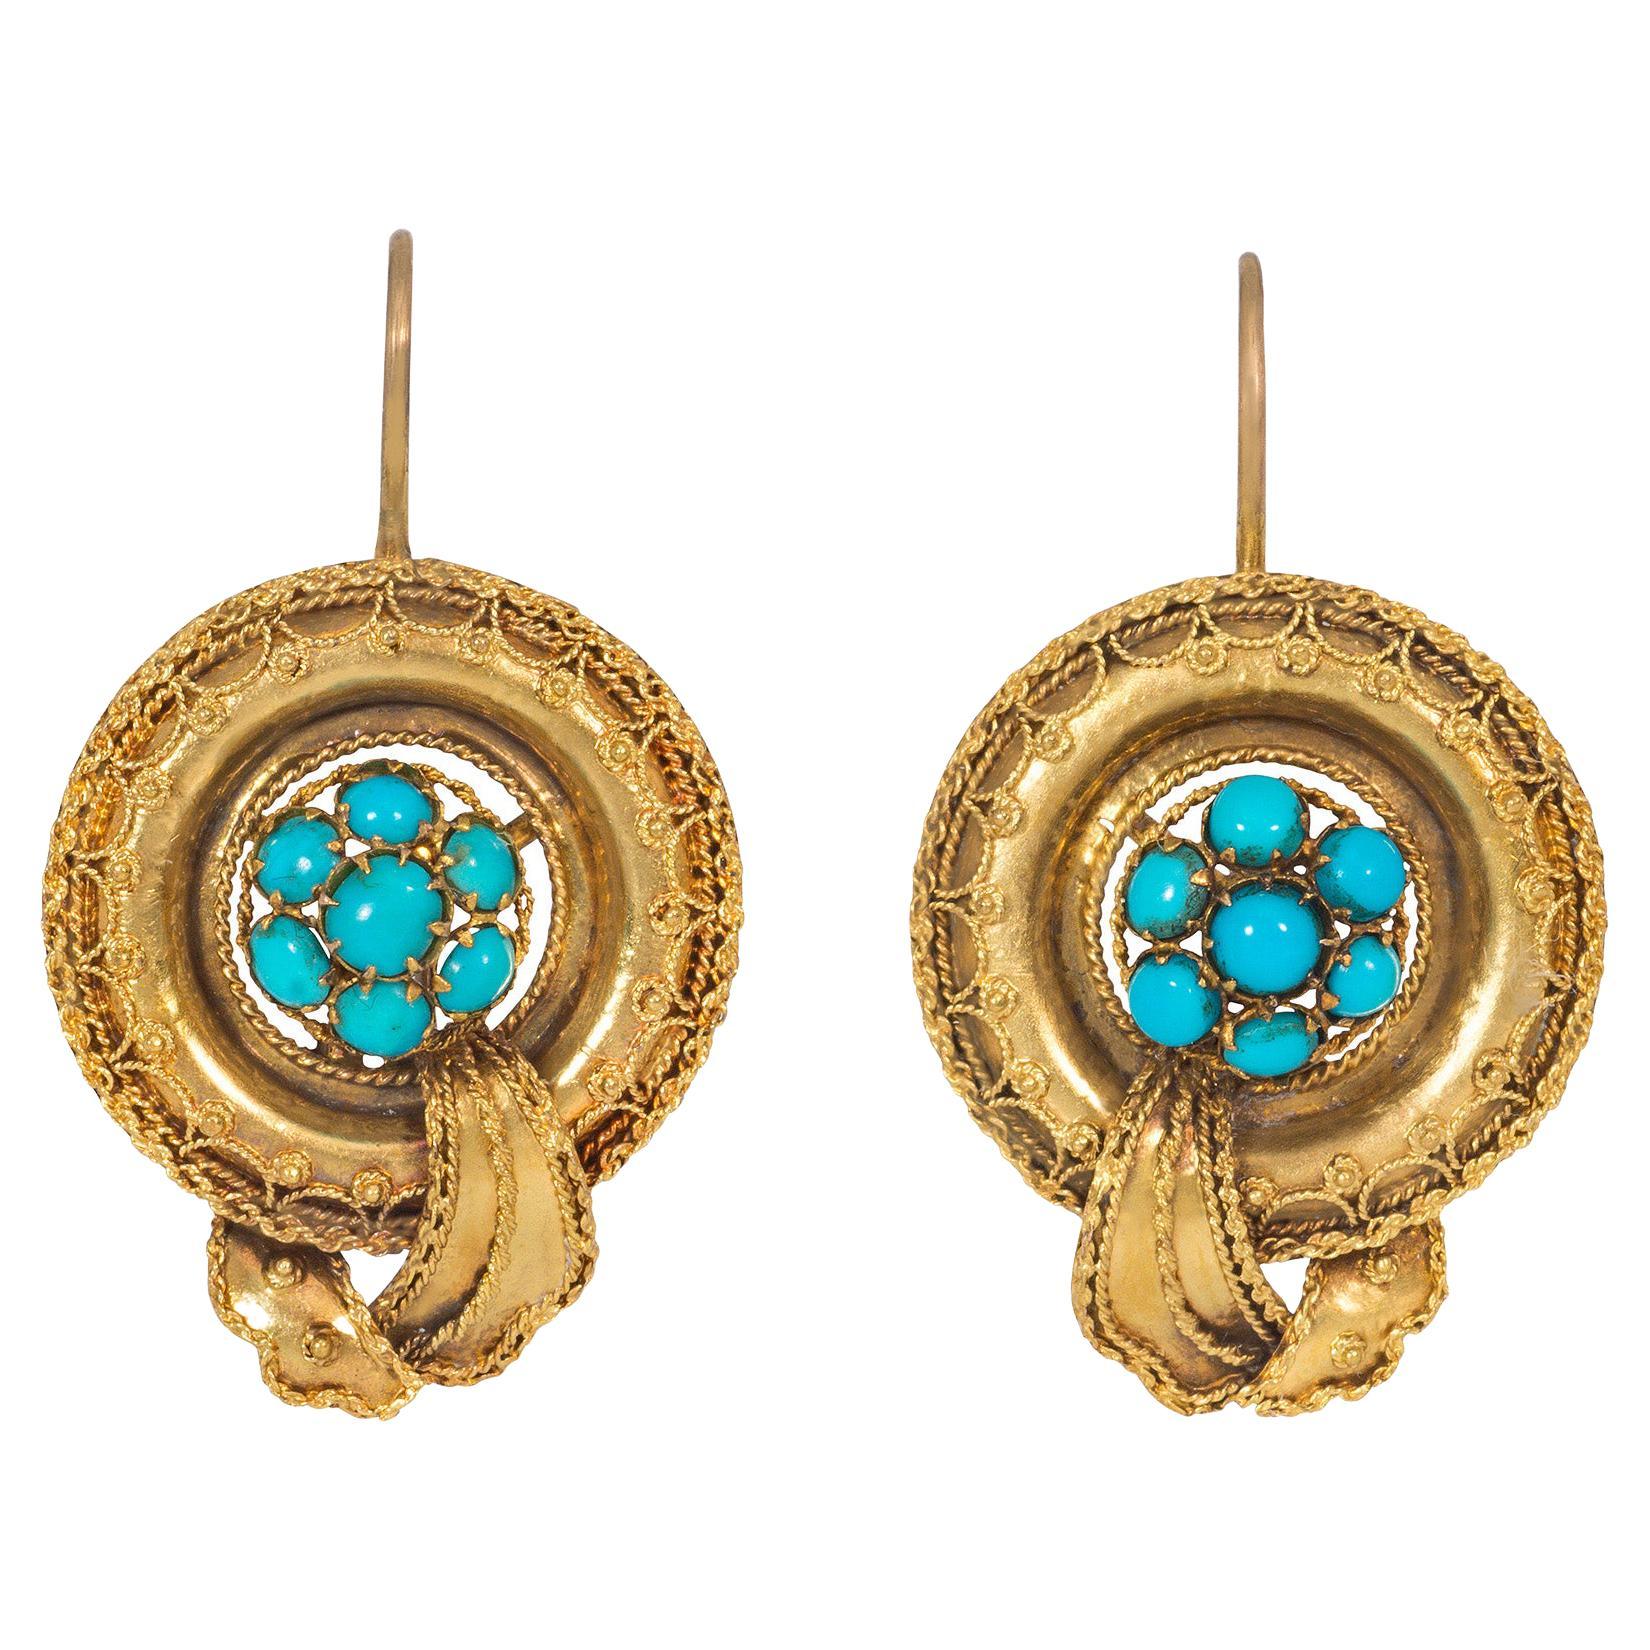 Victorian Gold and Turquoise Earrings with Applied Granulation and Wirework